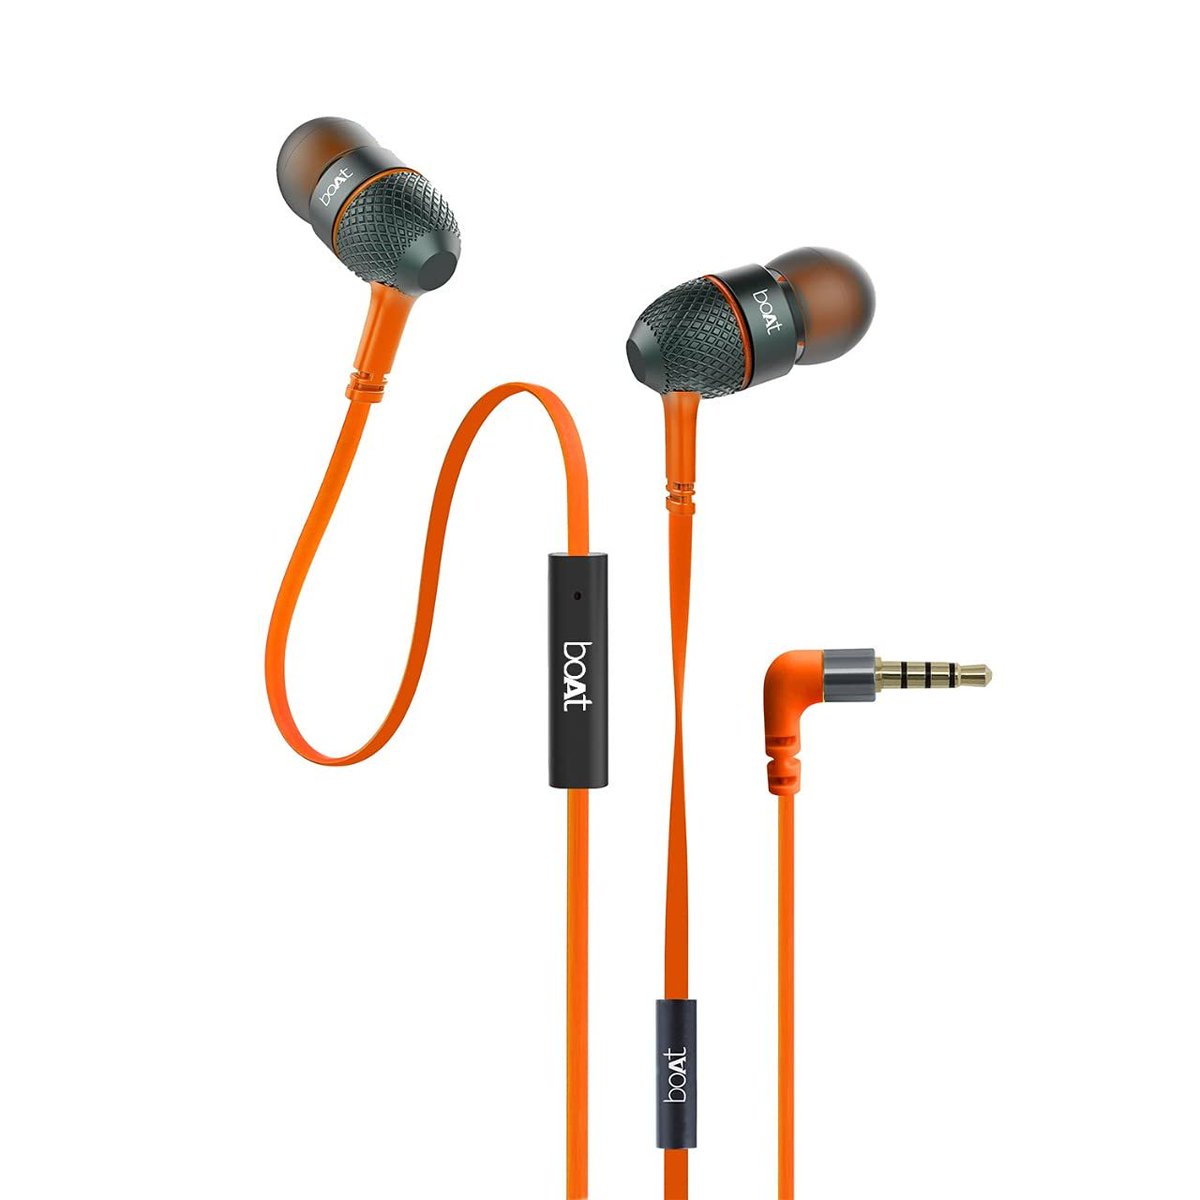 boAt Bassheads 220 Wired in Ear Earphones with Mic(Molten Orange)

📌 Discount: 60%

➡️   amzn.to/42yxZnf

#ad #AmazonIndia #bestdeals #dealsoftheday